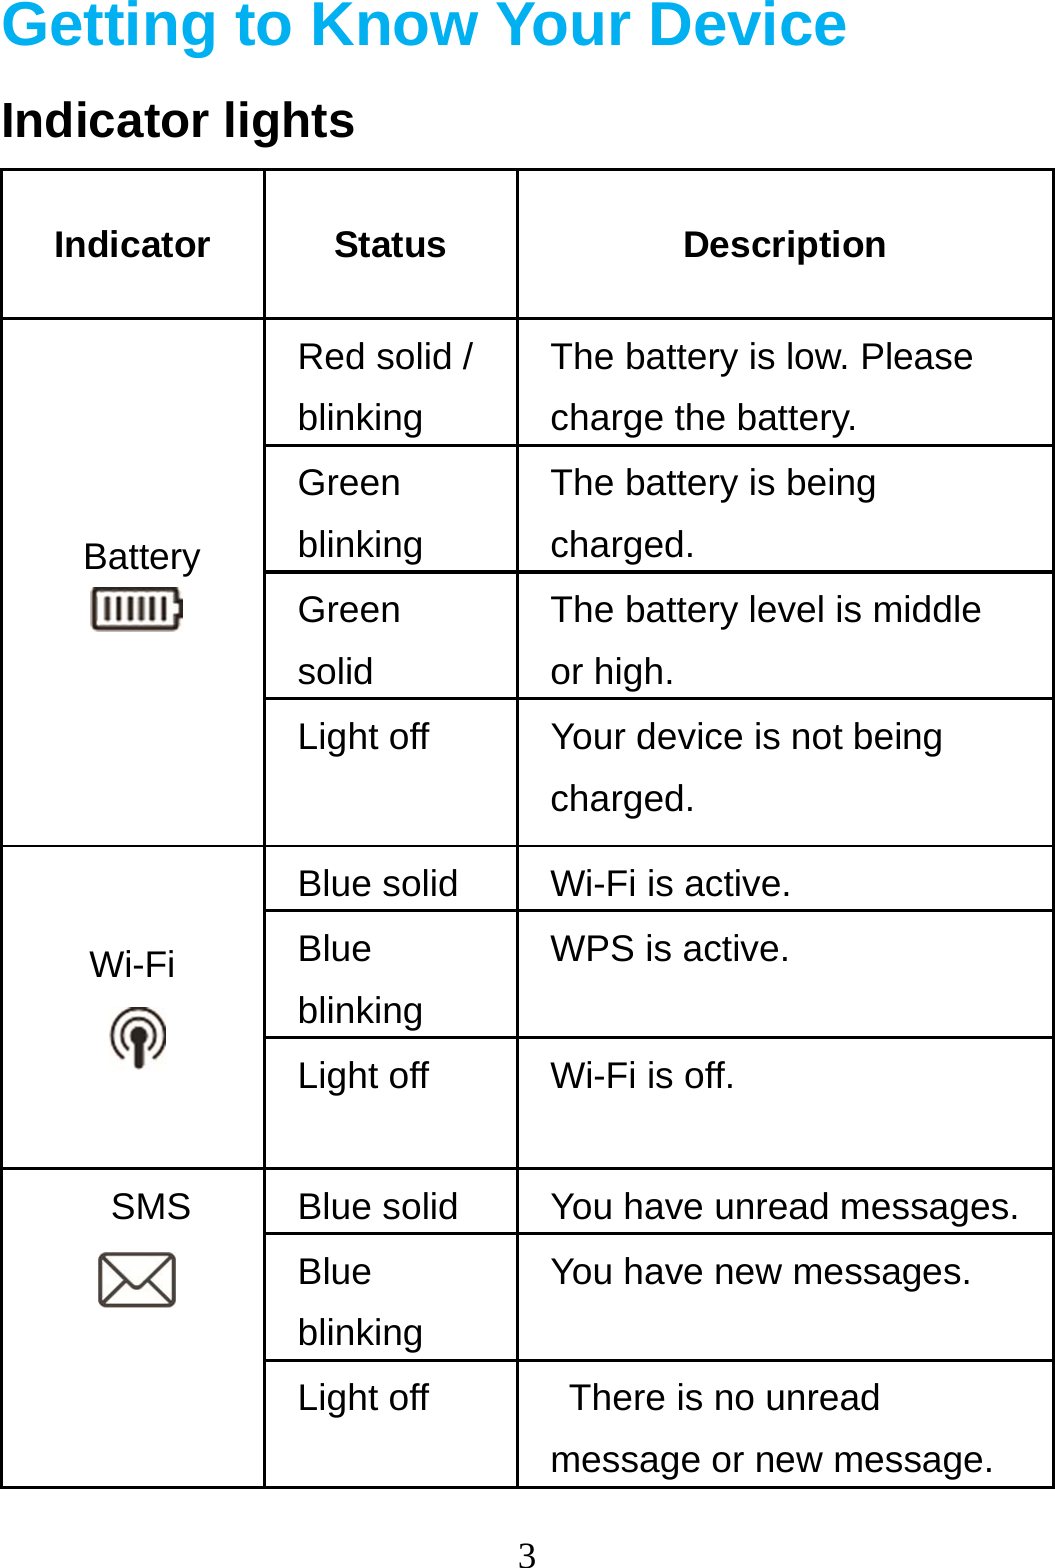 3  Getting to Know Your Device Indicator lights Indicator Status Description Battery  Red solid / blinking The battery is low. Please charge the battery. Green blinking The battery is being charged. Green solid The battery level is middle or high. Light off  Your device is not being charged. Wi-Fi  Blue solid  Wi-Fi is active. Blue blinking WPS is active. Light off  Wi-Fi is off. SMS  Blue solid  You have unread messages.Blue blinking You have new messages. Light off    There is no unread message or new message. 